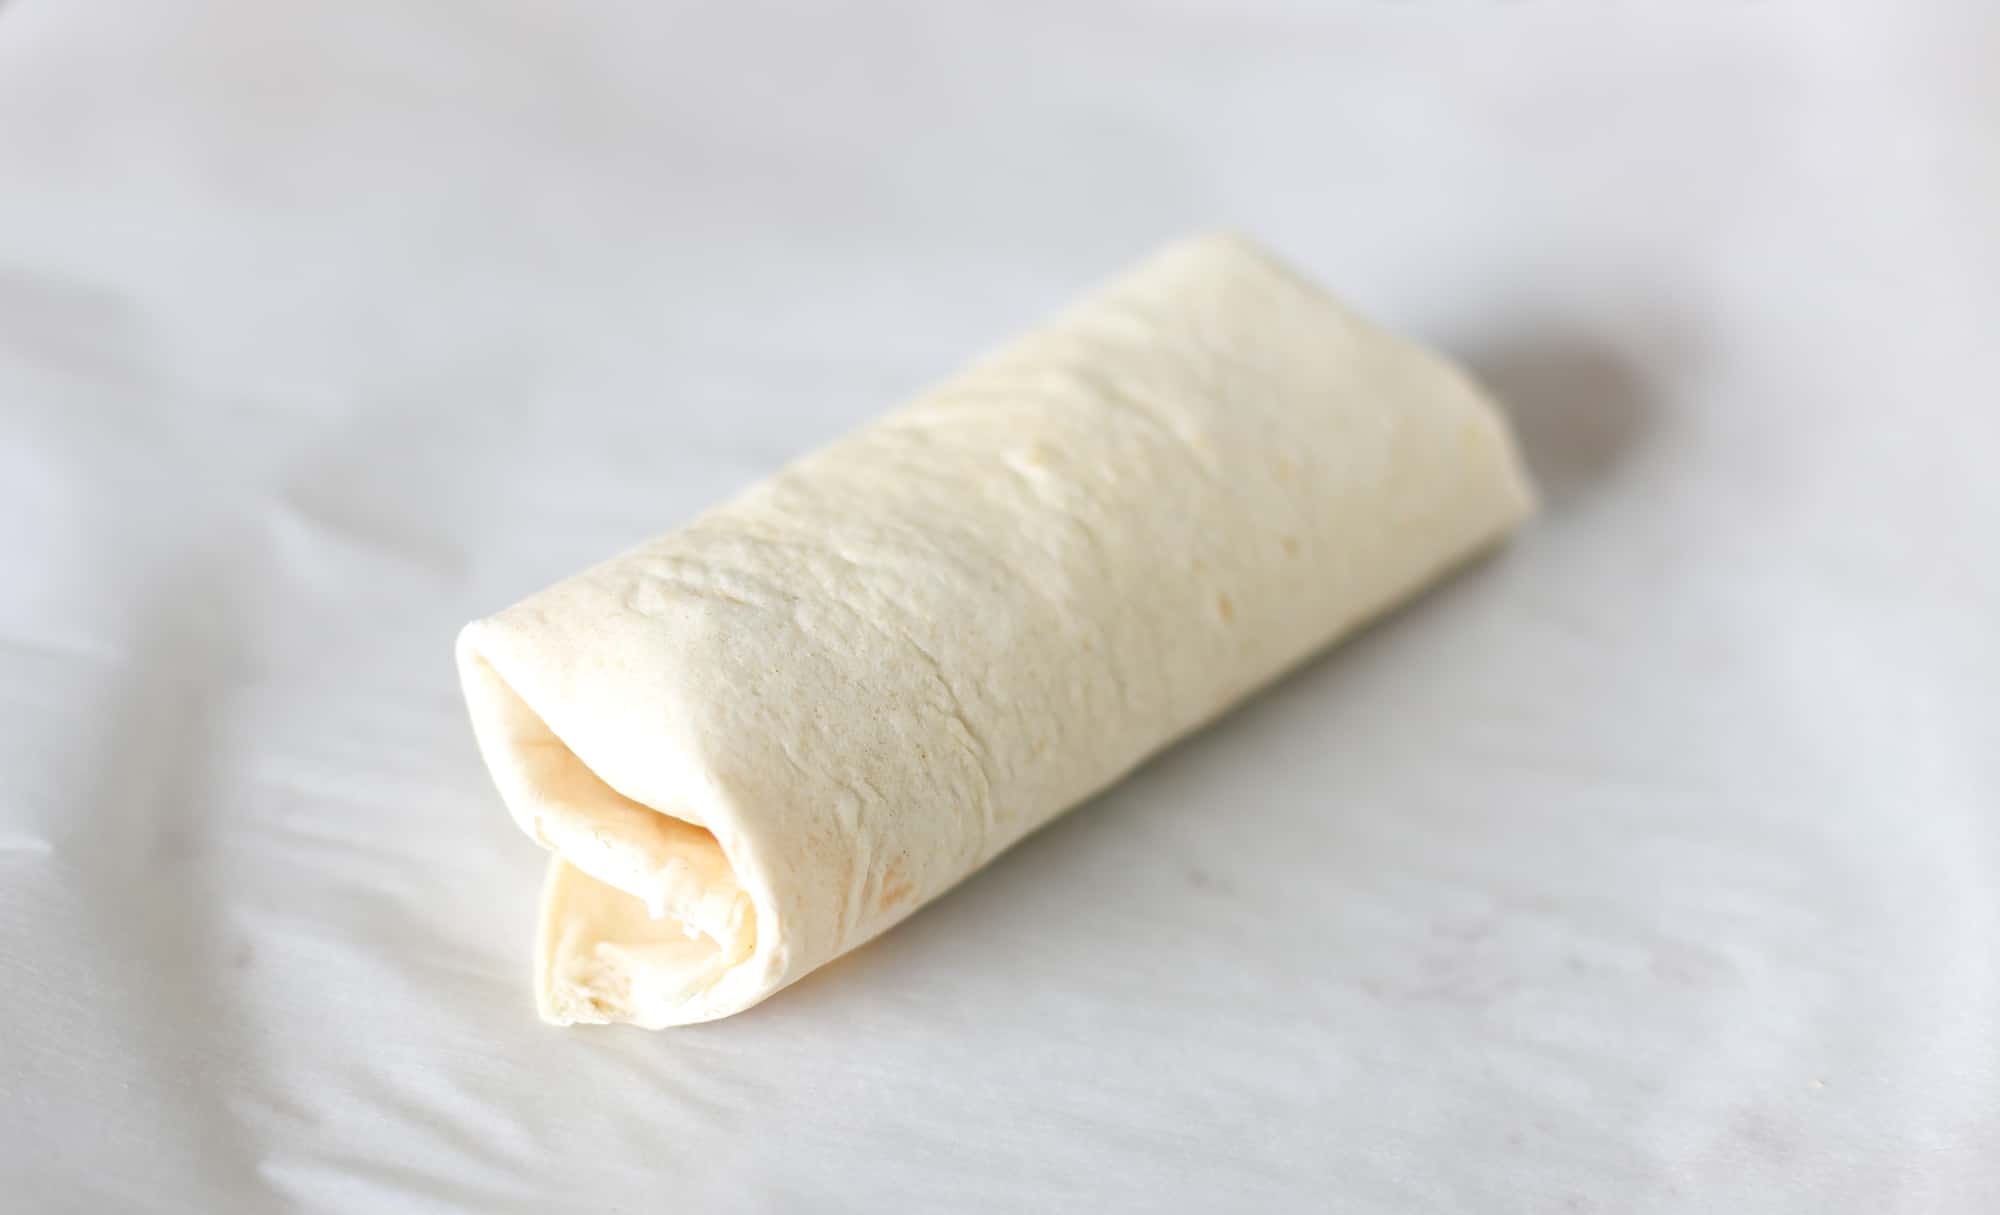 A burrito rolled up and ready to be baked.